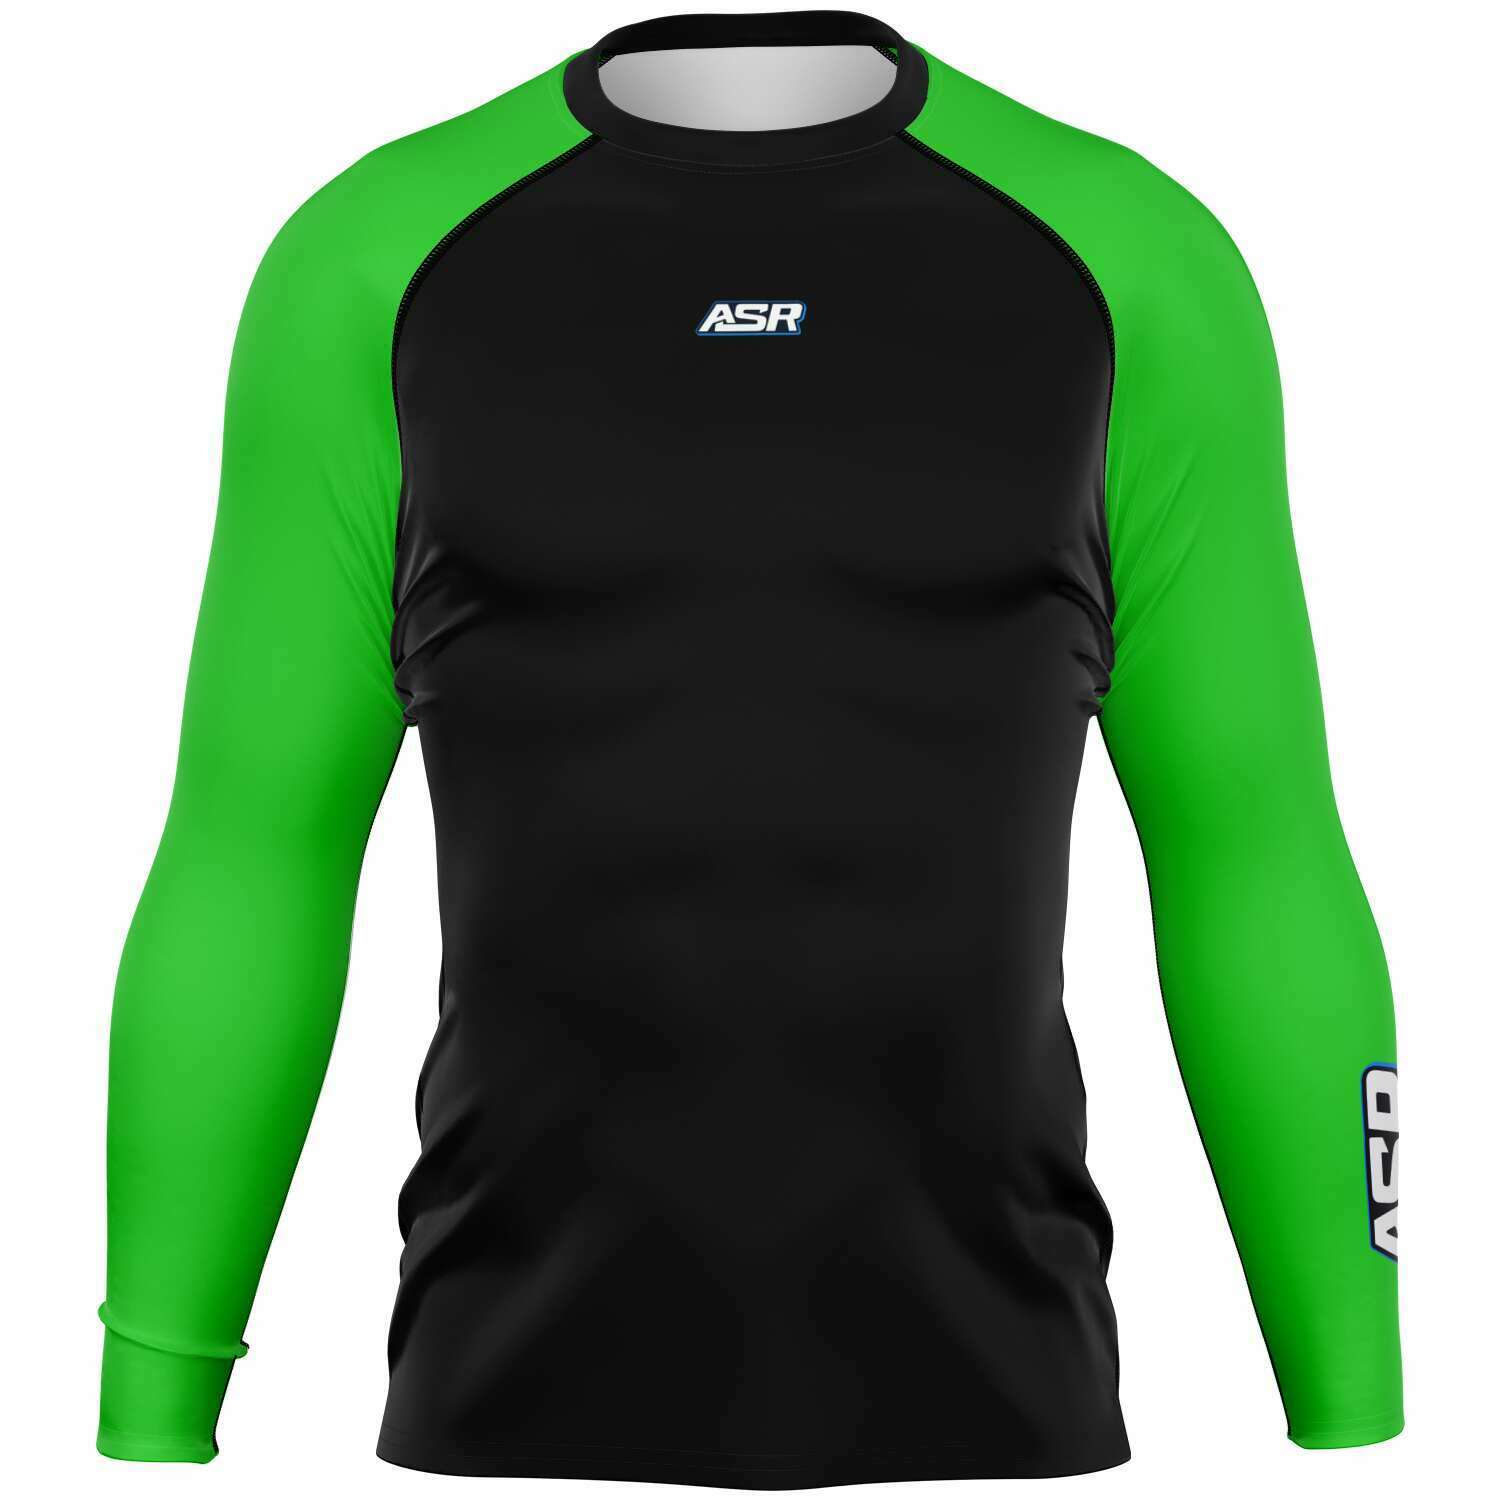 ASR Black / Green Sleeves Performance Compression Top